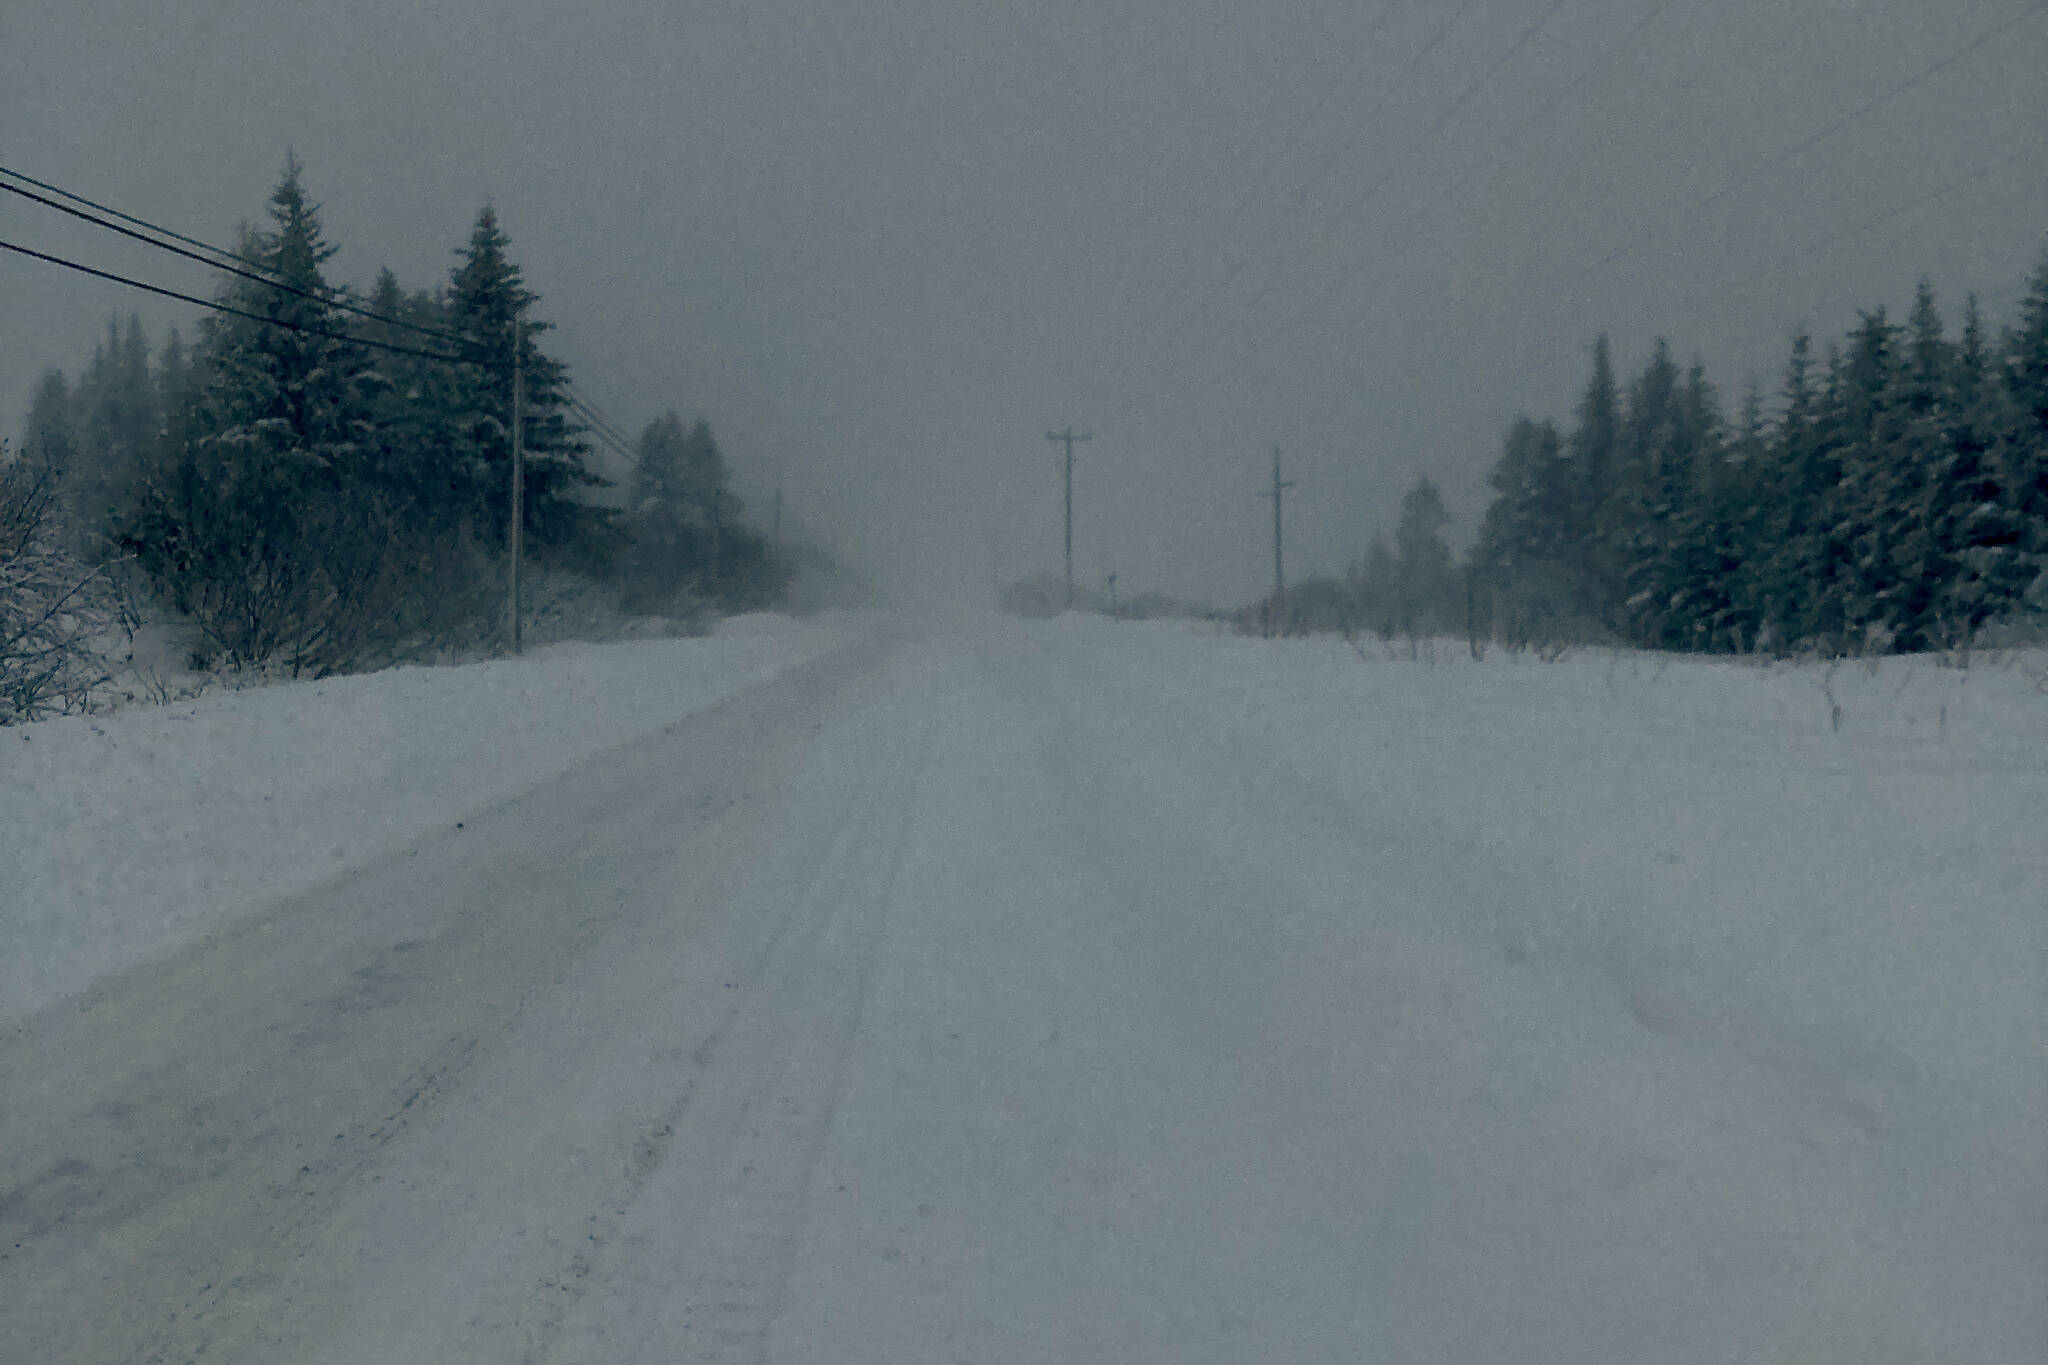 Diamond Ridge Road near Homer, Alaska, had been plowed on Monday morning, Dec. 5, 2021, but visibility was limited. (Photo by Michael Armstrong/Homer News)